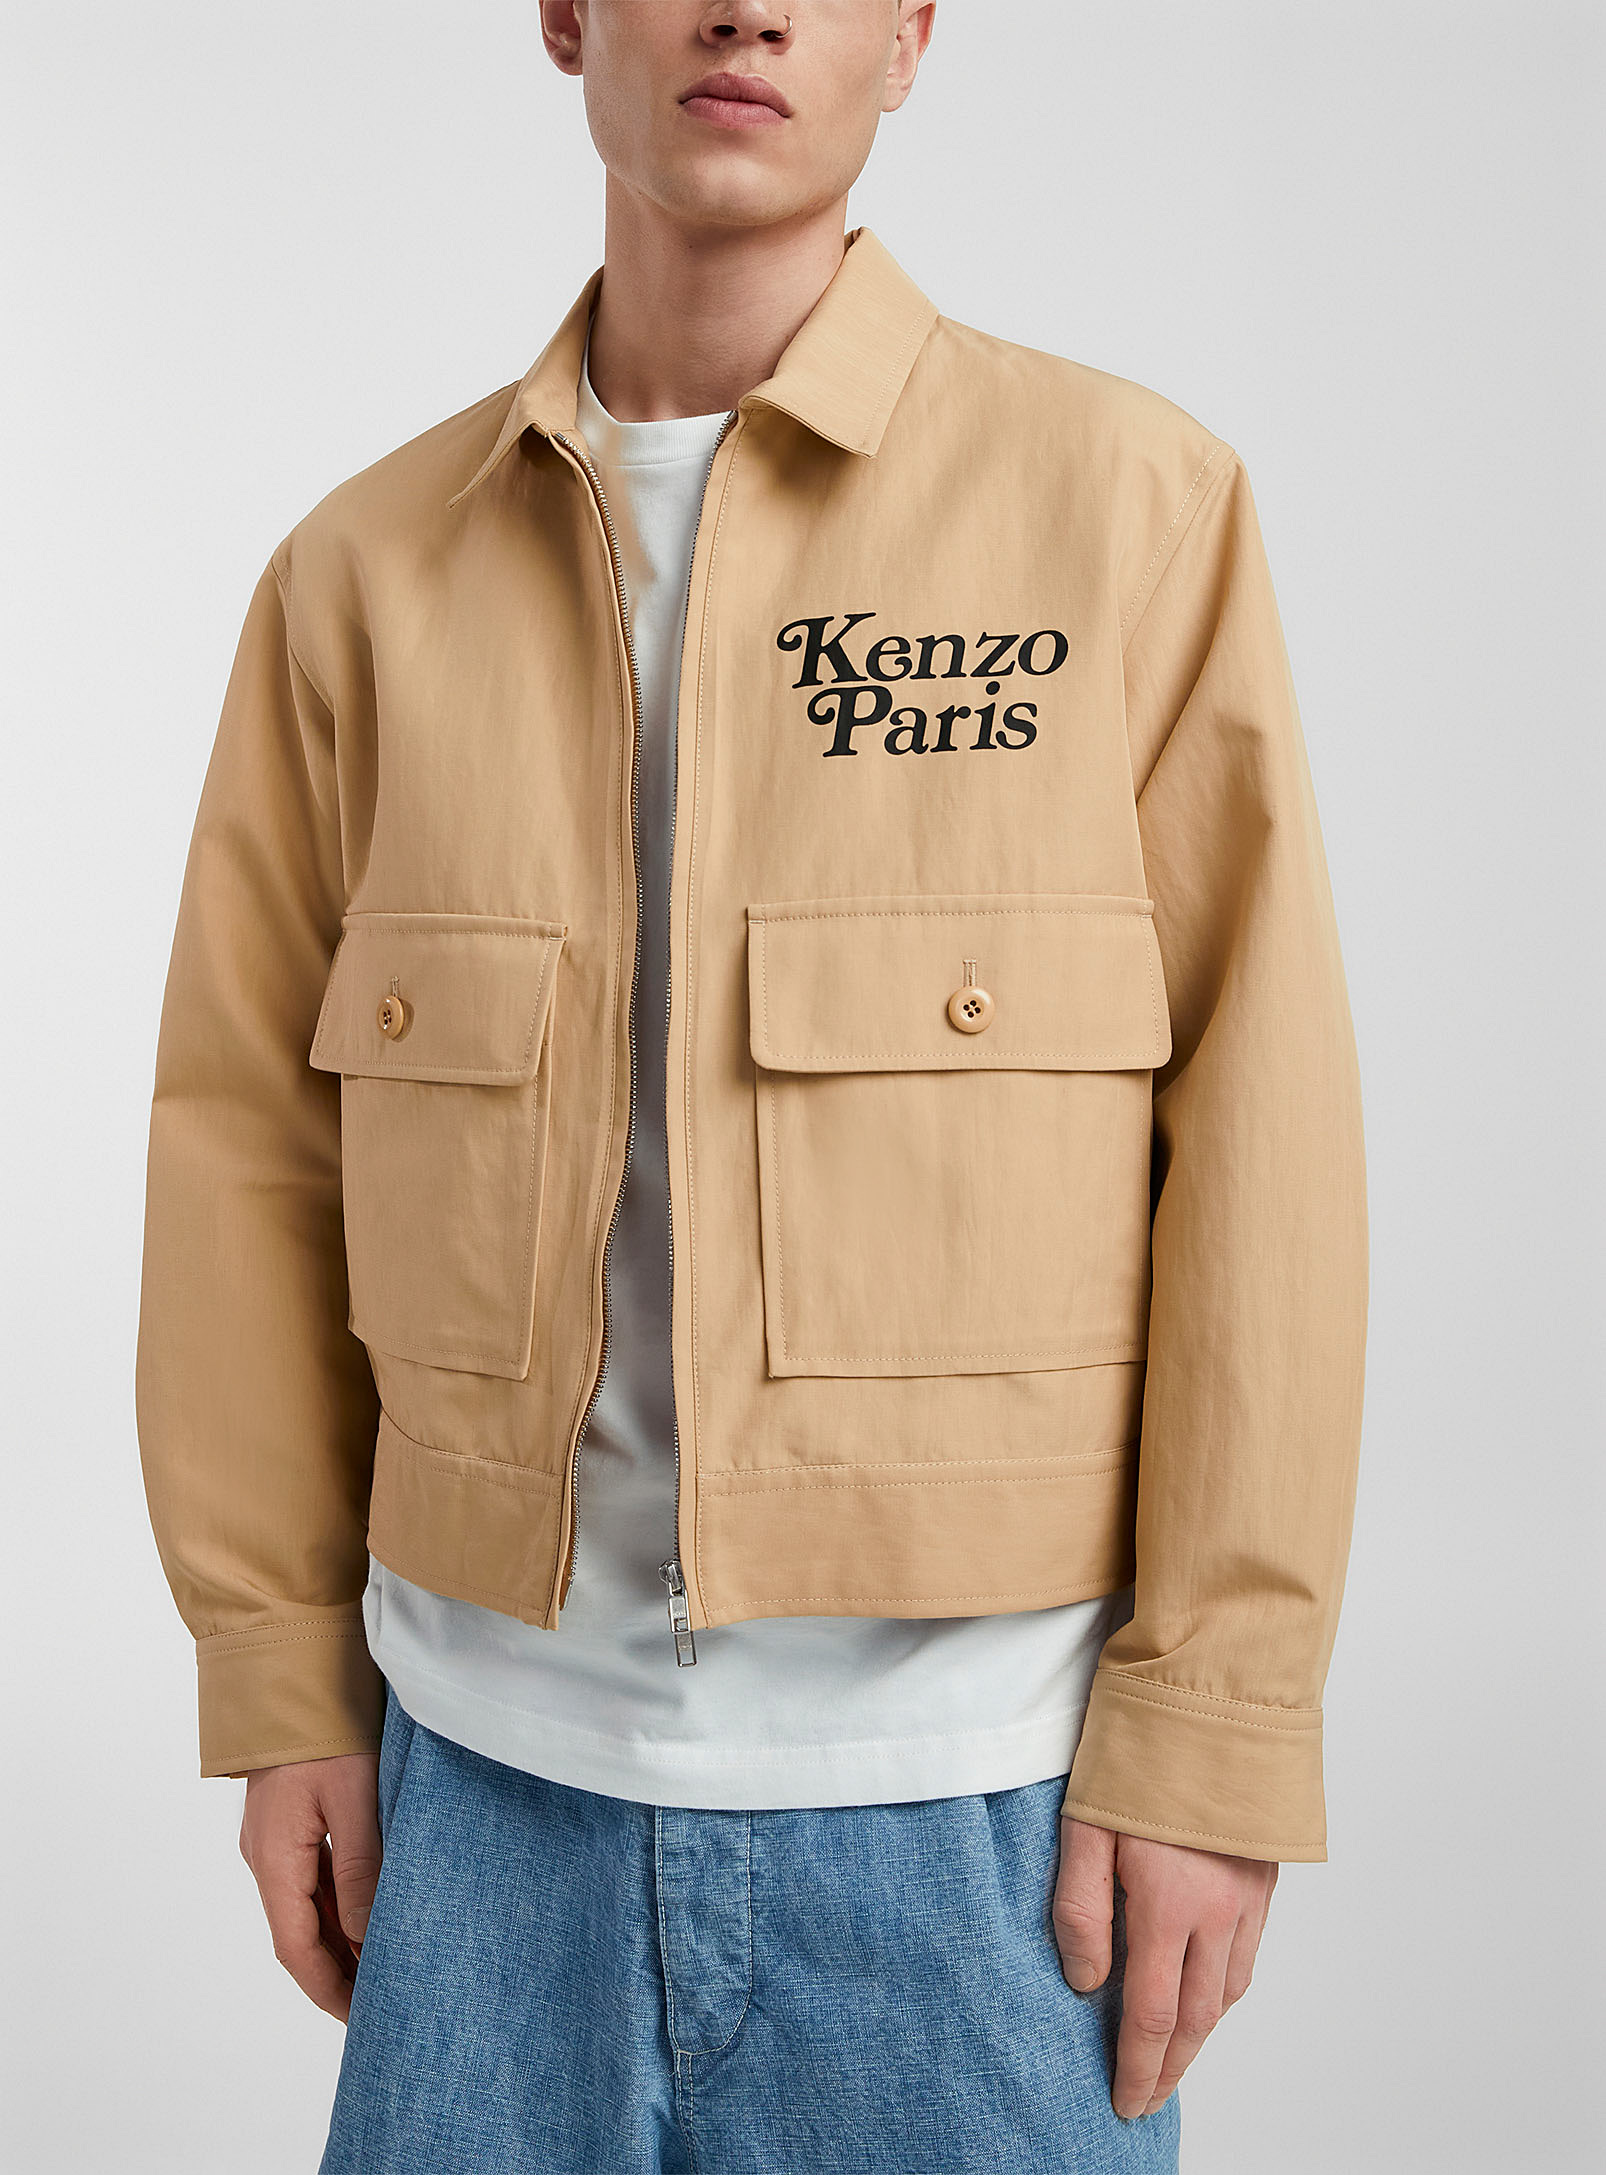 Kenzo - Men's By Verdy cropped jacket